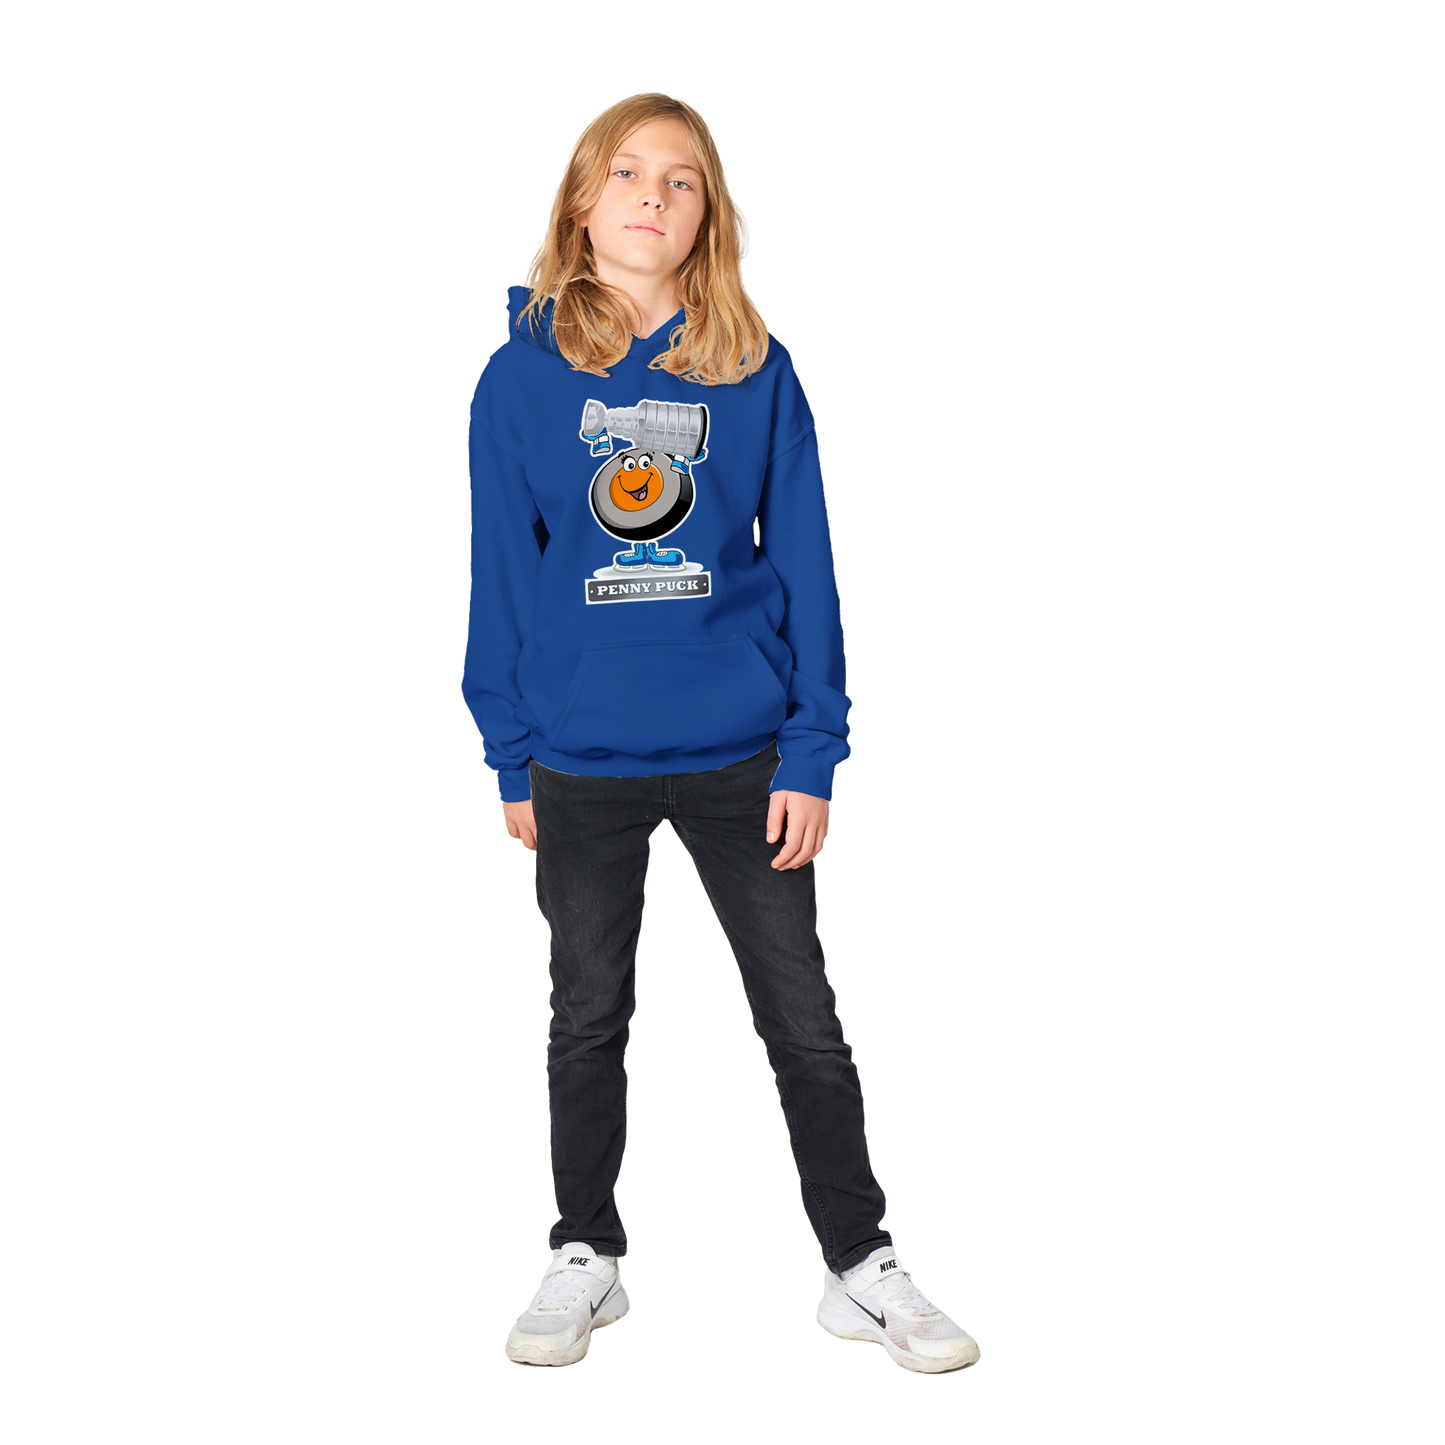 Penny Puck Stanley Cup Classic Kids Pullover Hoodie